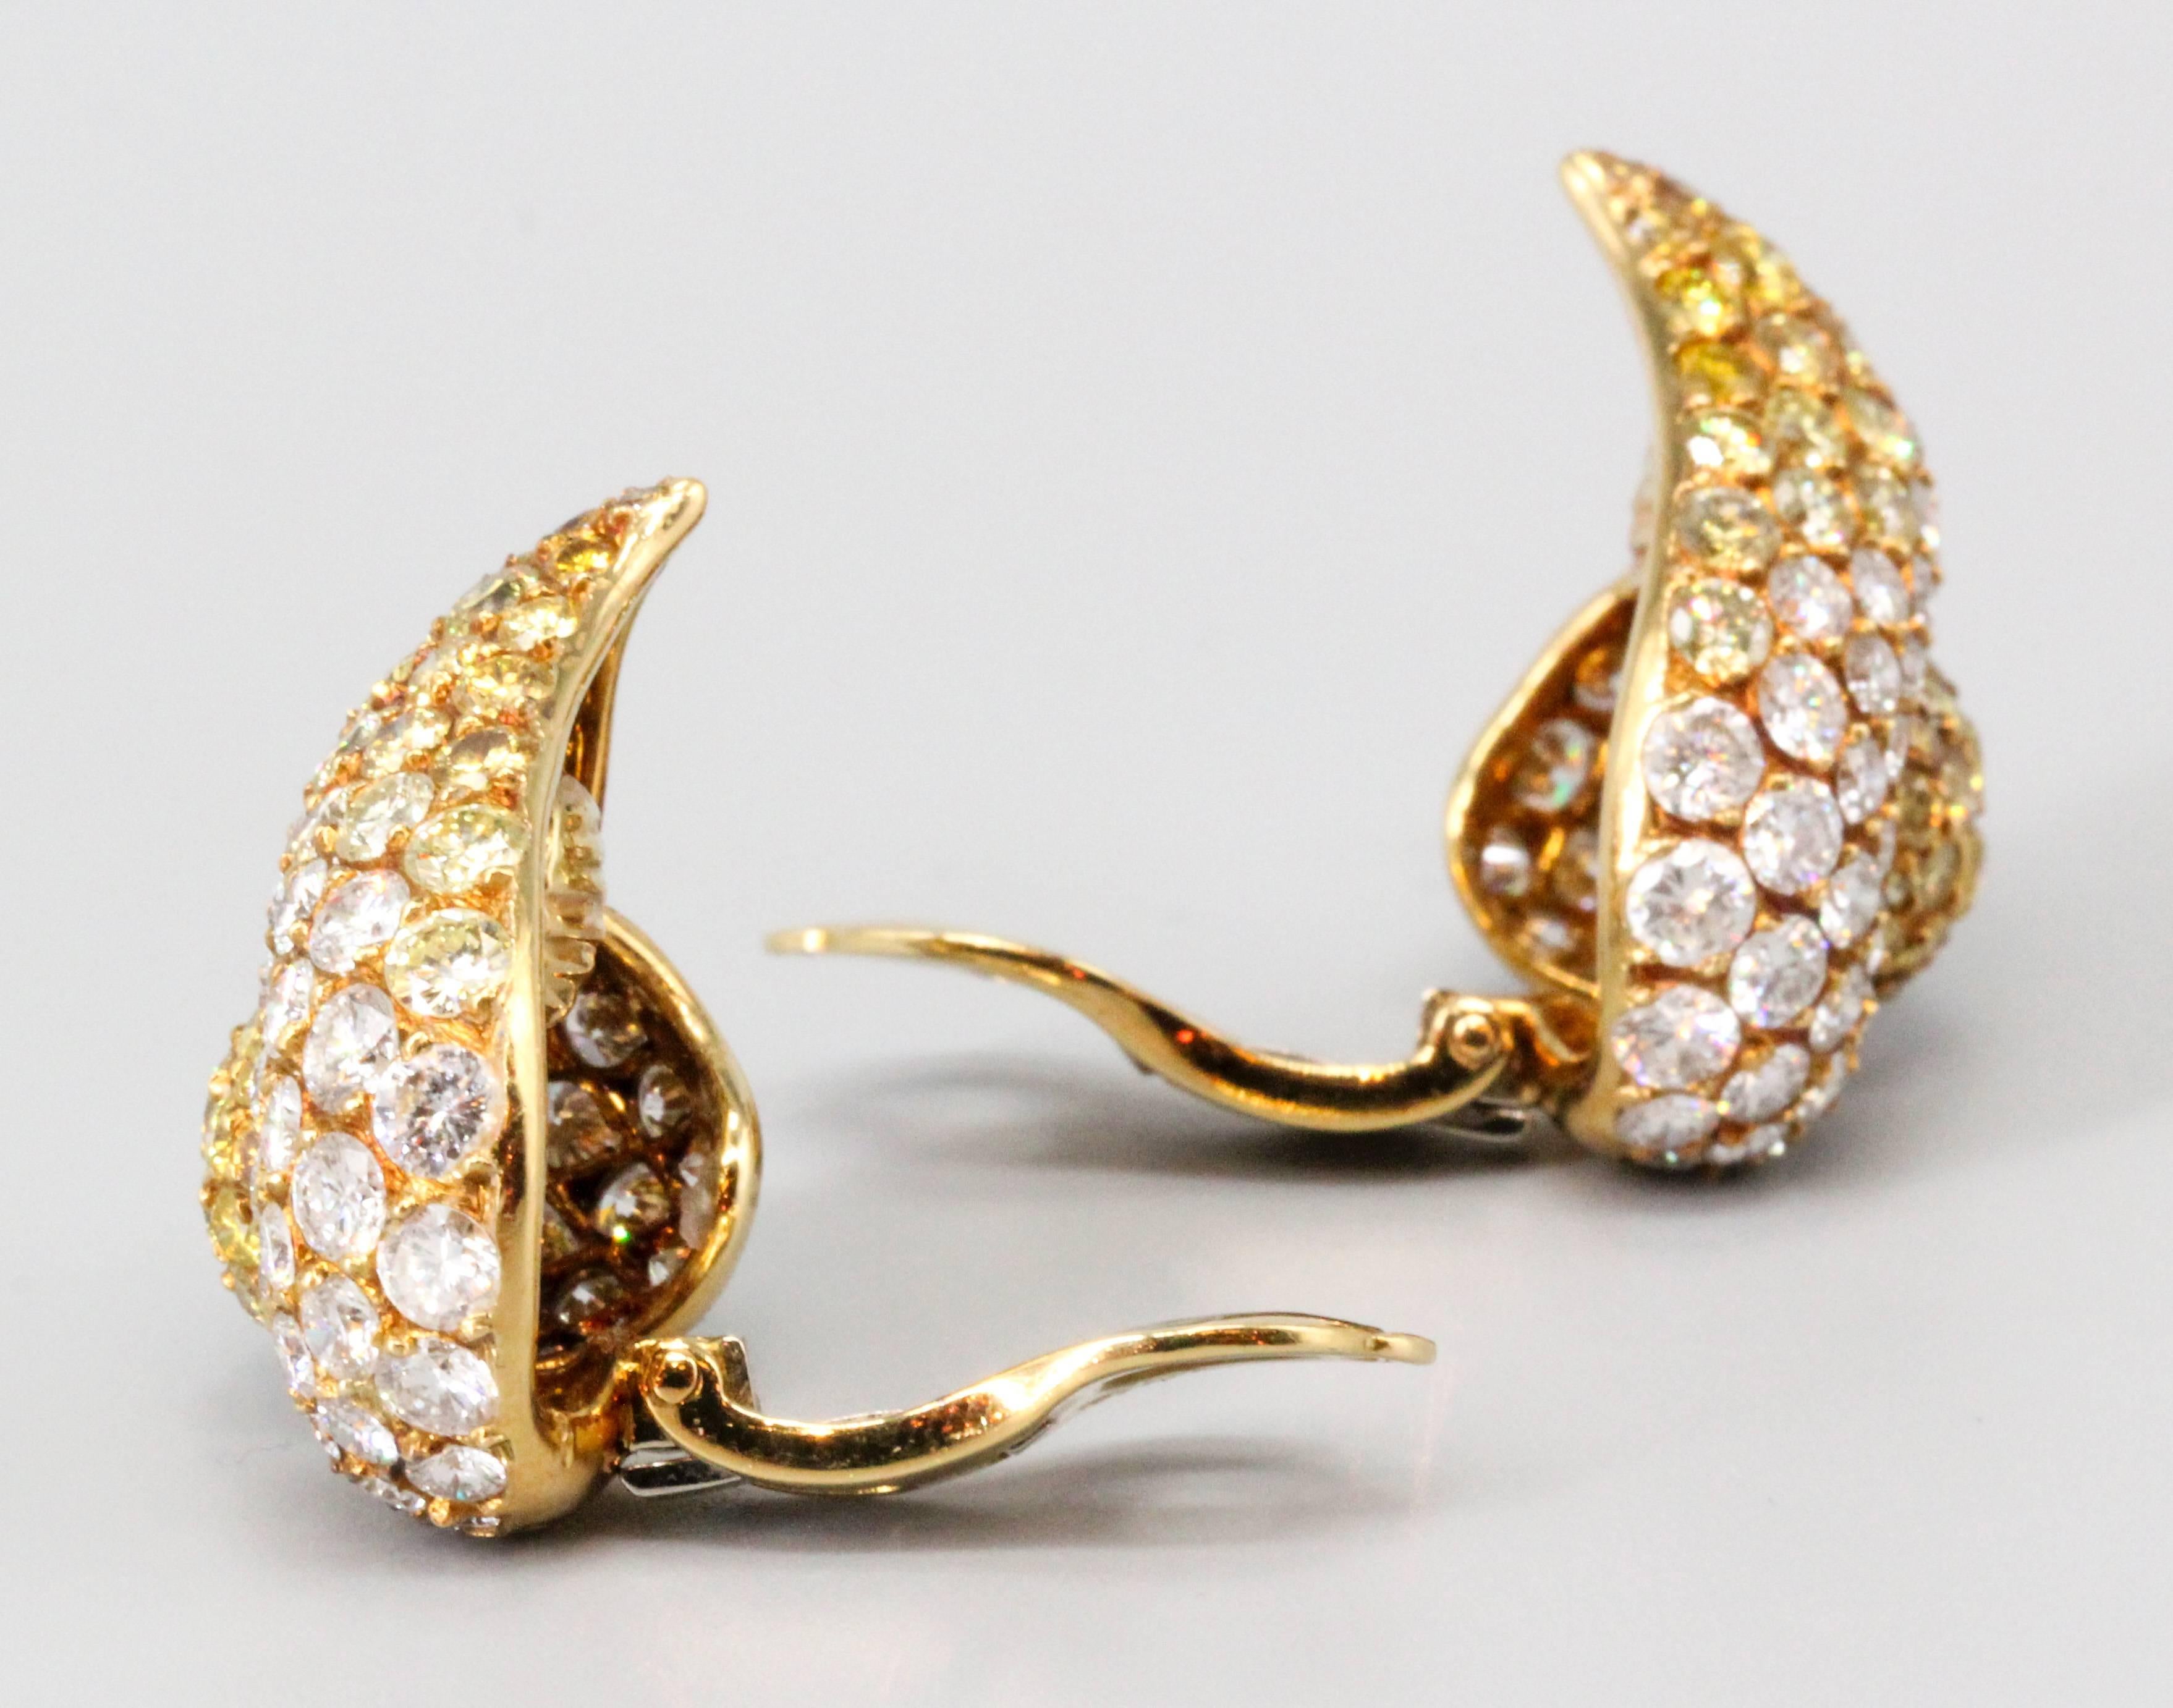 Very fine yellow and white diamond earrings set in 18K yellow gold by Gioia. The earrings are of abstract design, and feature approx. 10.0cts of high grade round brilliant cut diamonds of white and natural fancy yellow color. They show exceptional